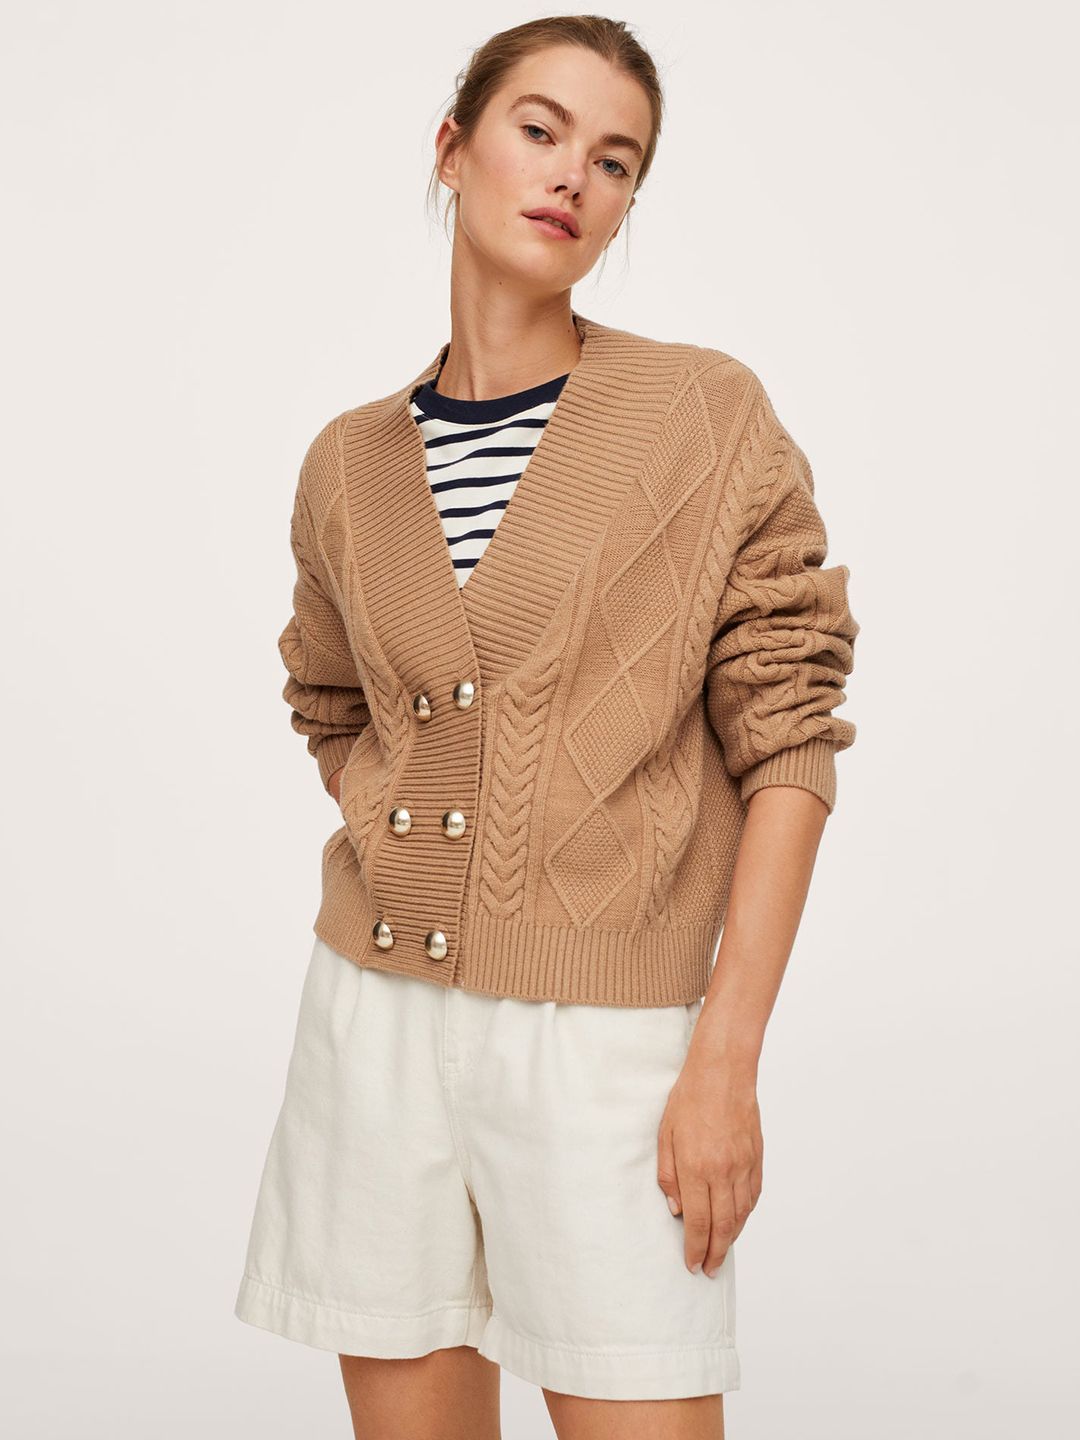 MANGO Women Beige Cable Knit Cardigan Price in India